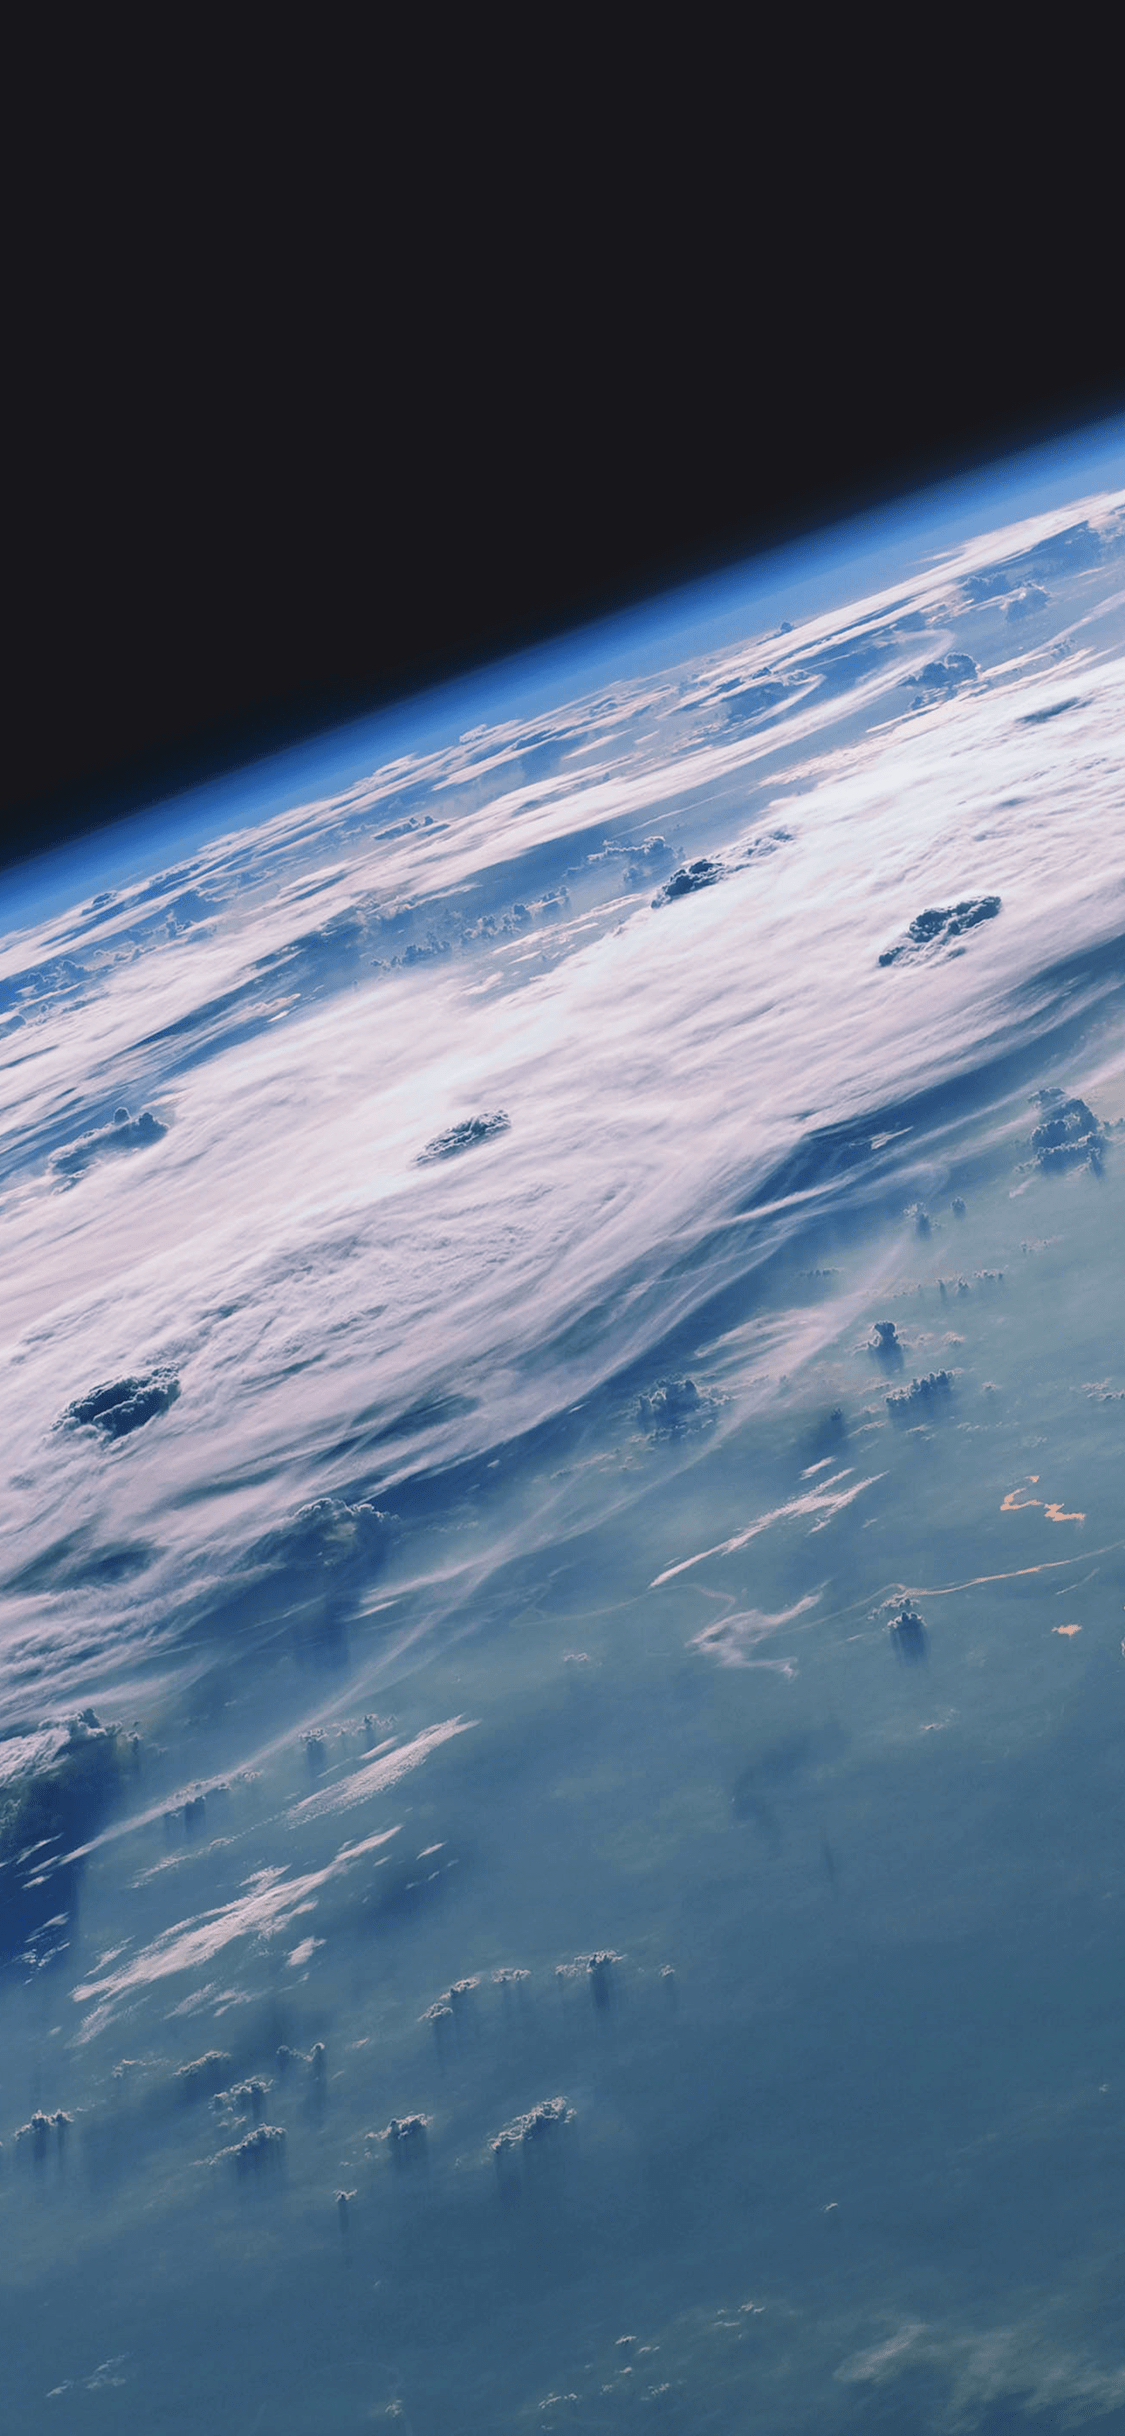 Earth from space wallpaper